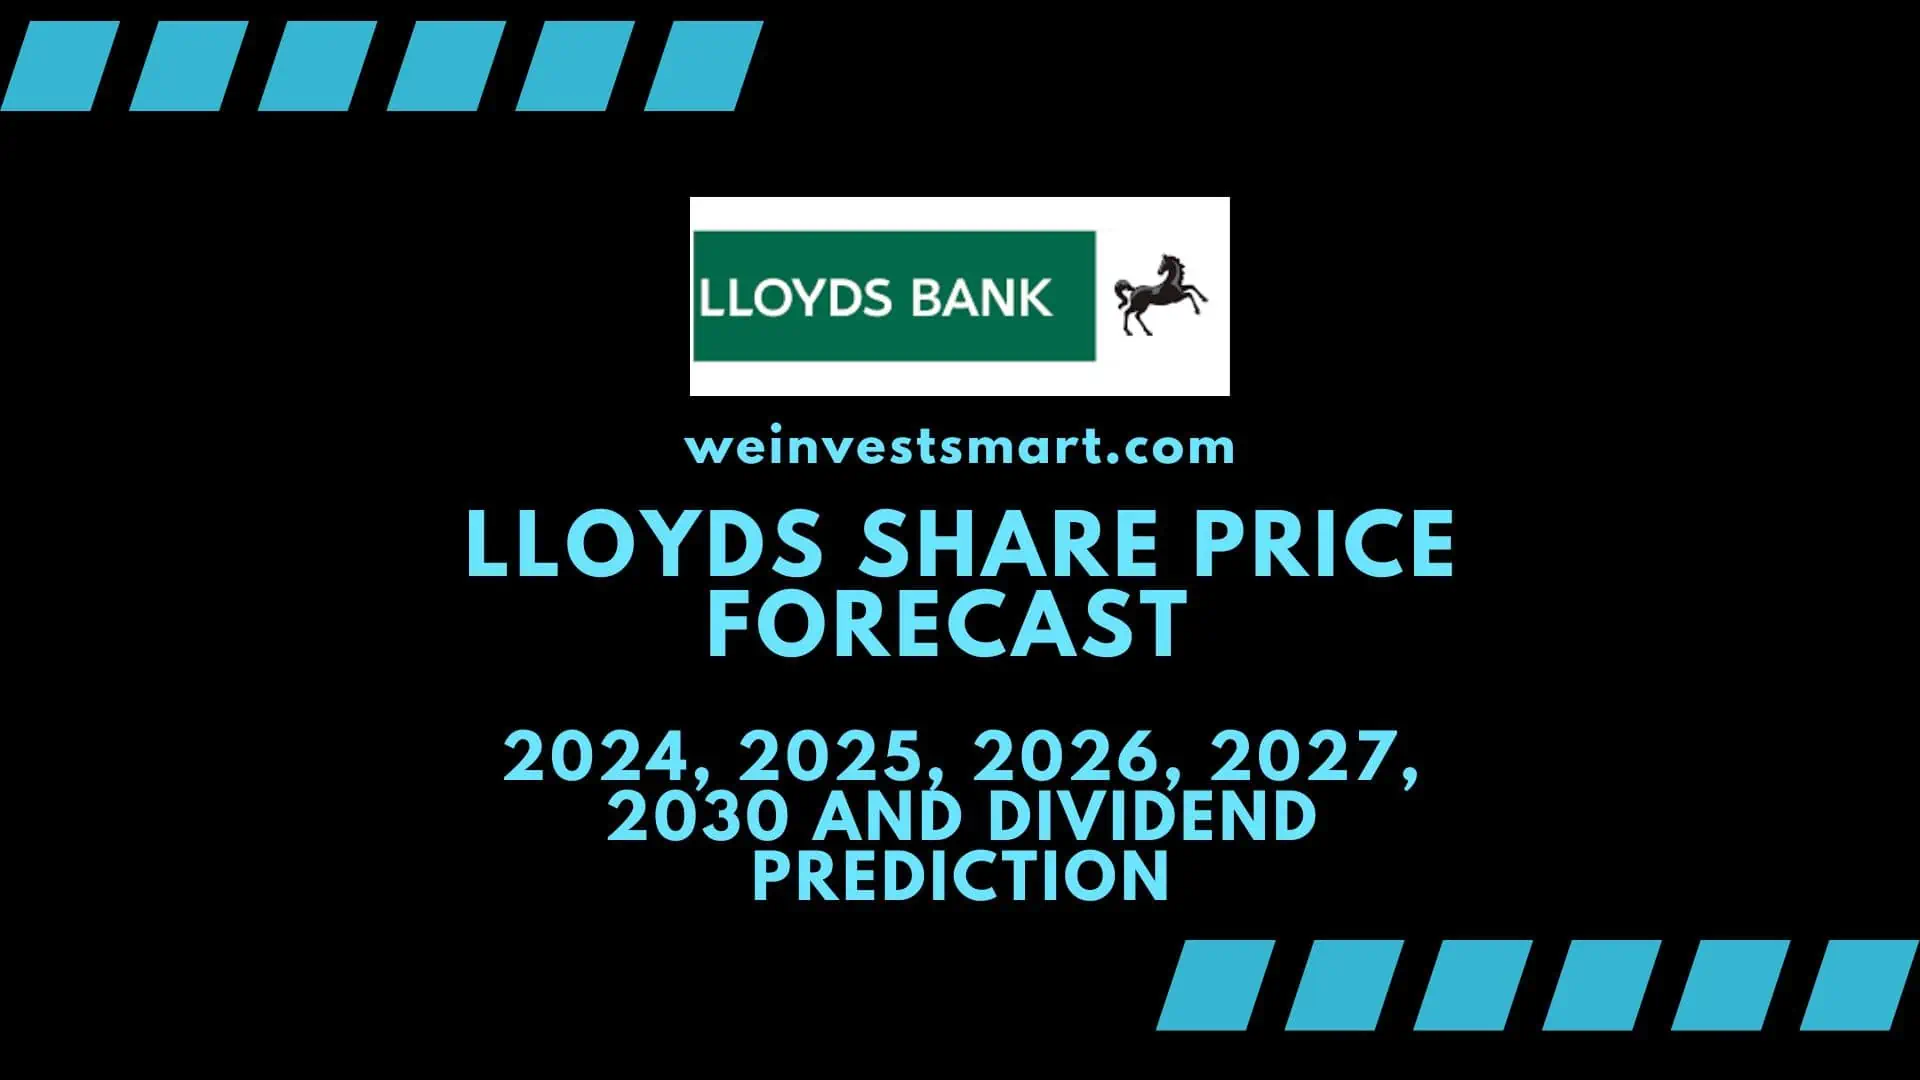 Lloyds Share Price Forecast 2024, 2025, 2026, 2027, 2030 and Dividend Prediction